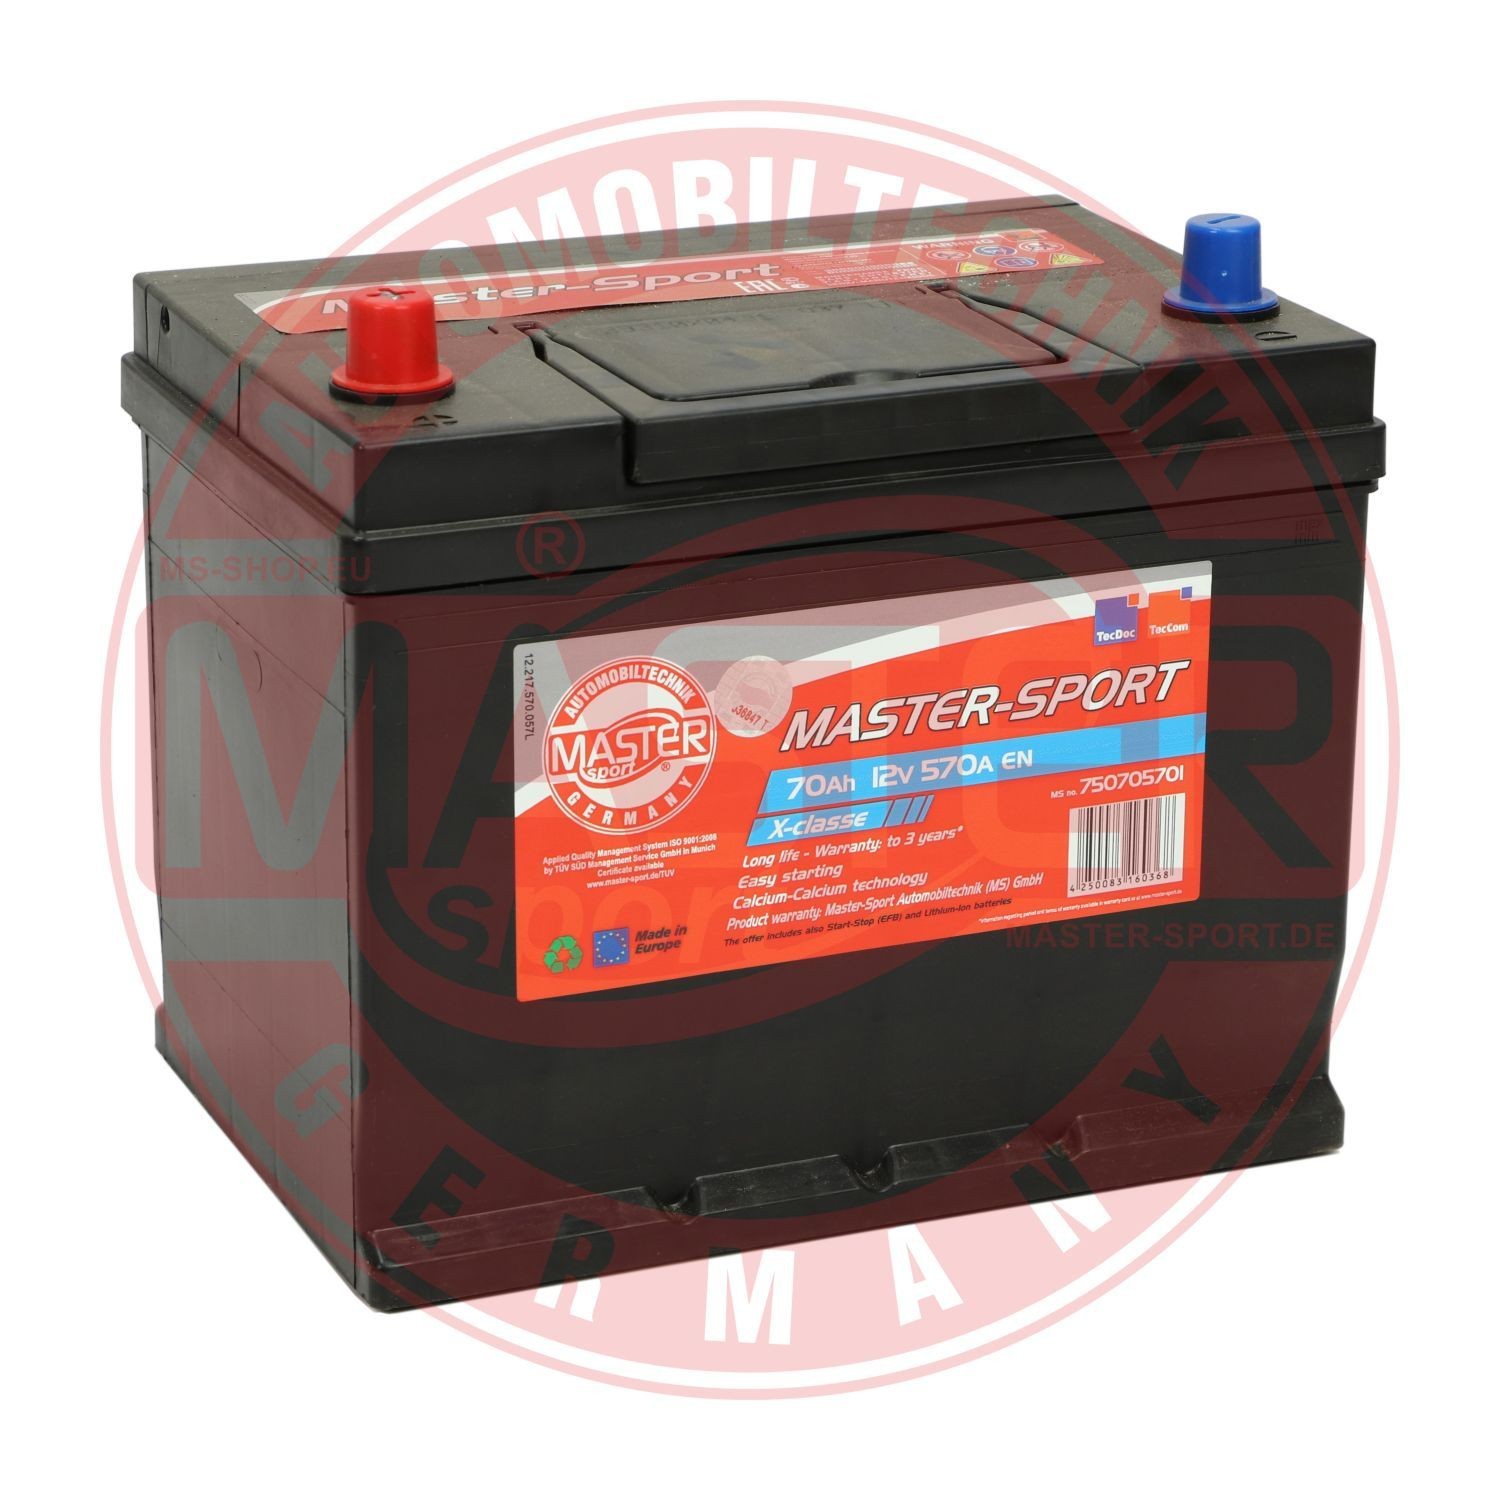 Jeep CHEROKEE Auxiliary battery 10189468 MASTER-SPORT 750705701 online buy